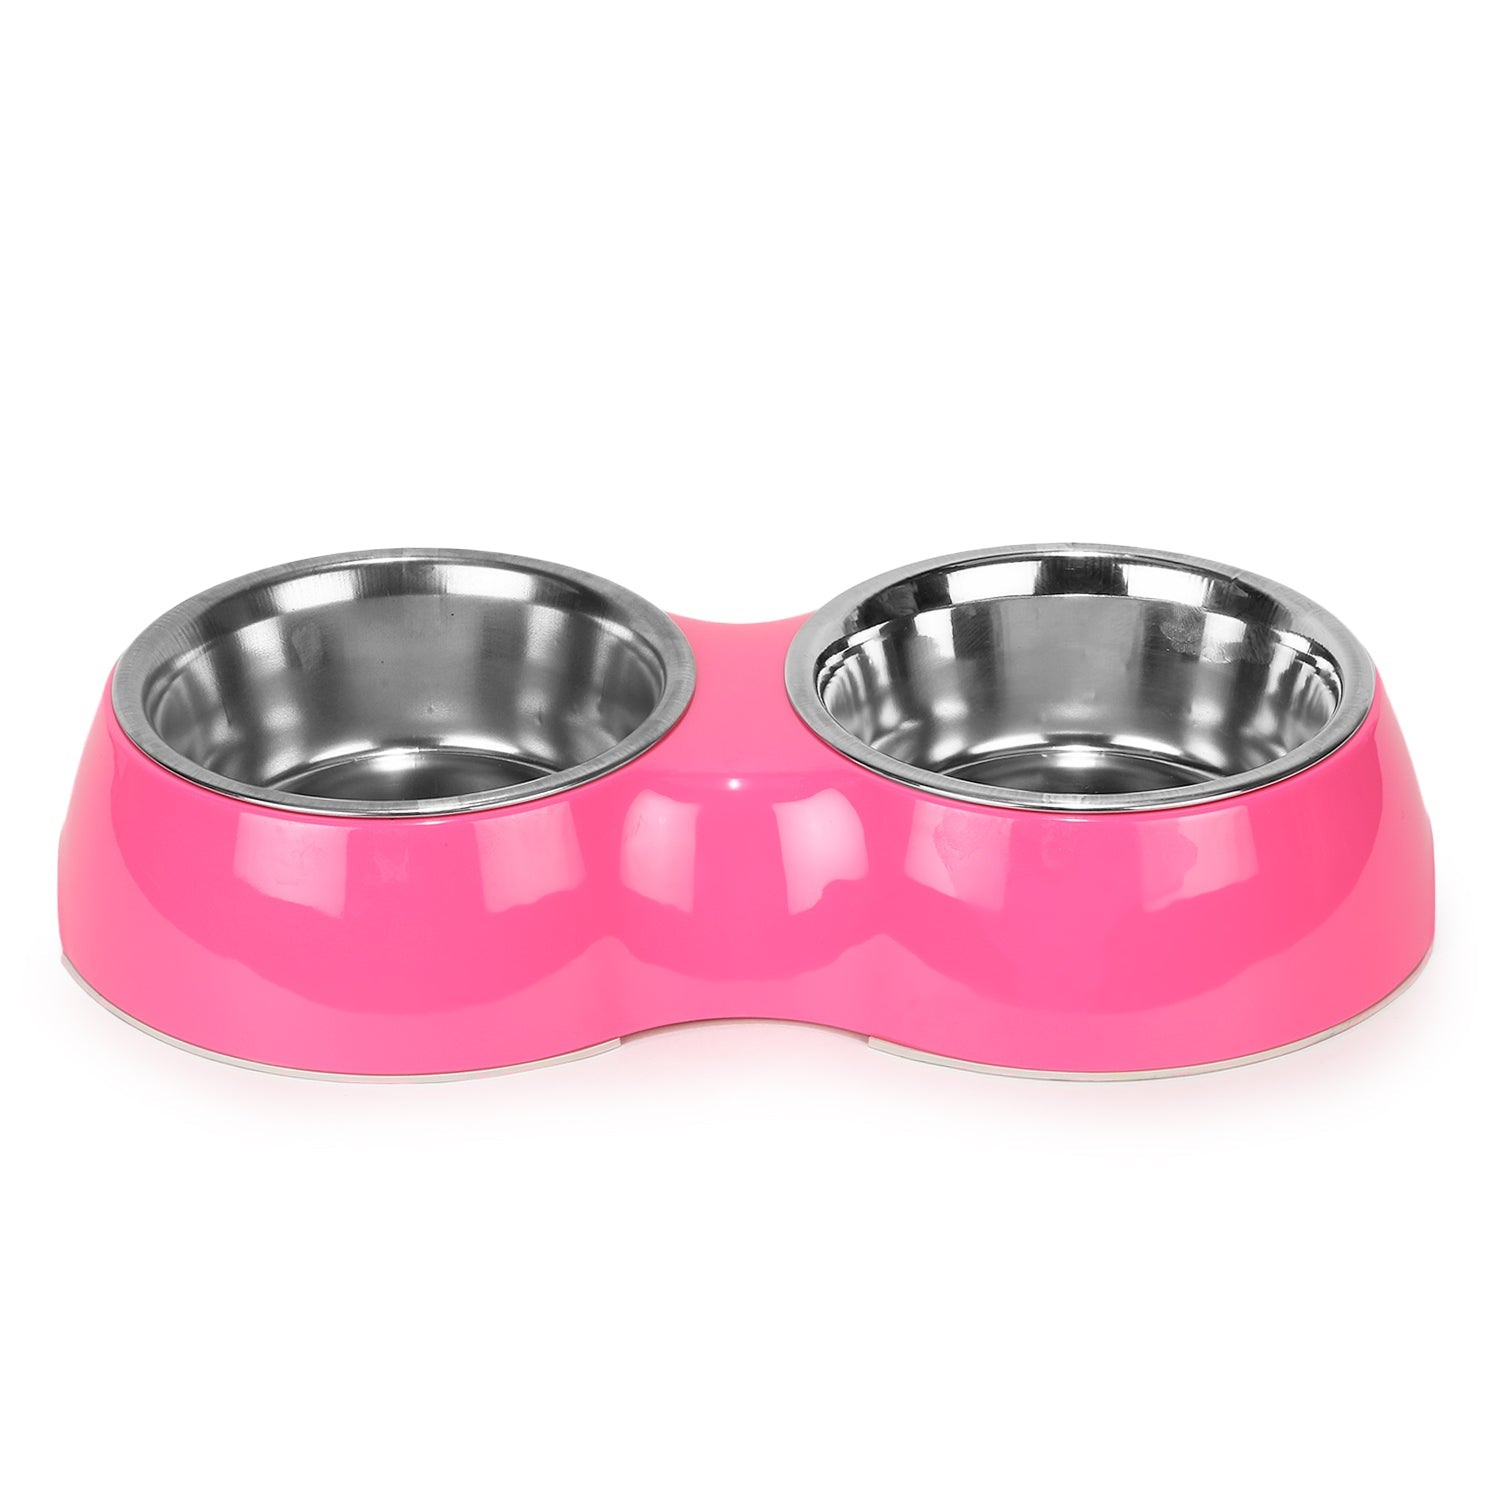 Melamine Double Dinner Set Pet Feeding Bowls for food and water (Pink)